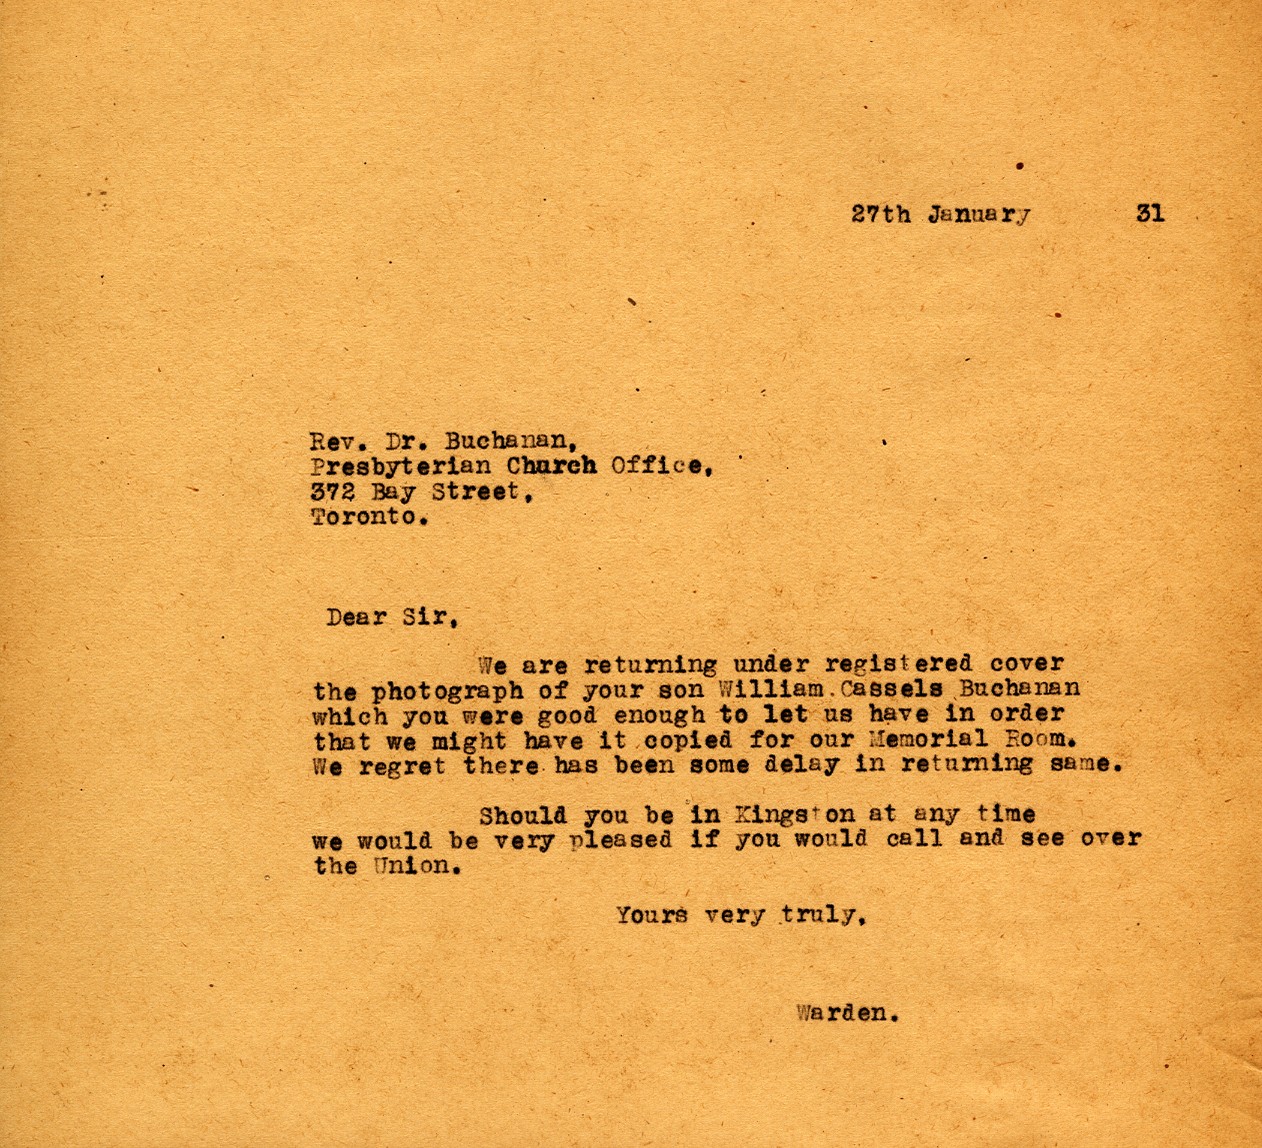 Letter from the Warden to Rev. Dr. Buchanan, 27th January 1931